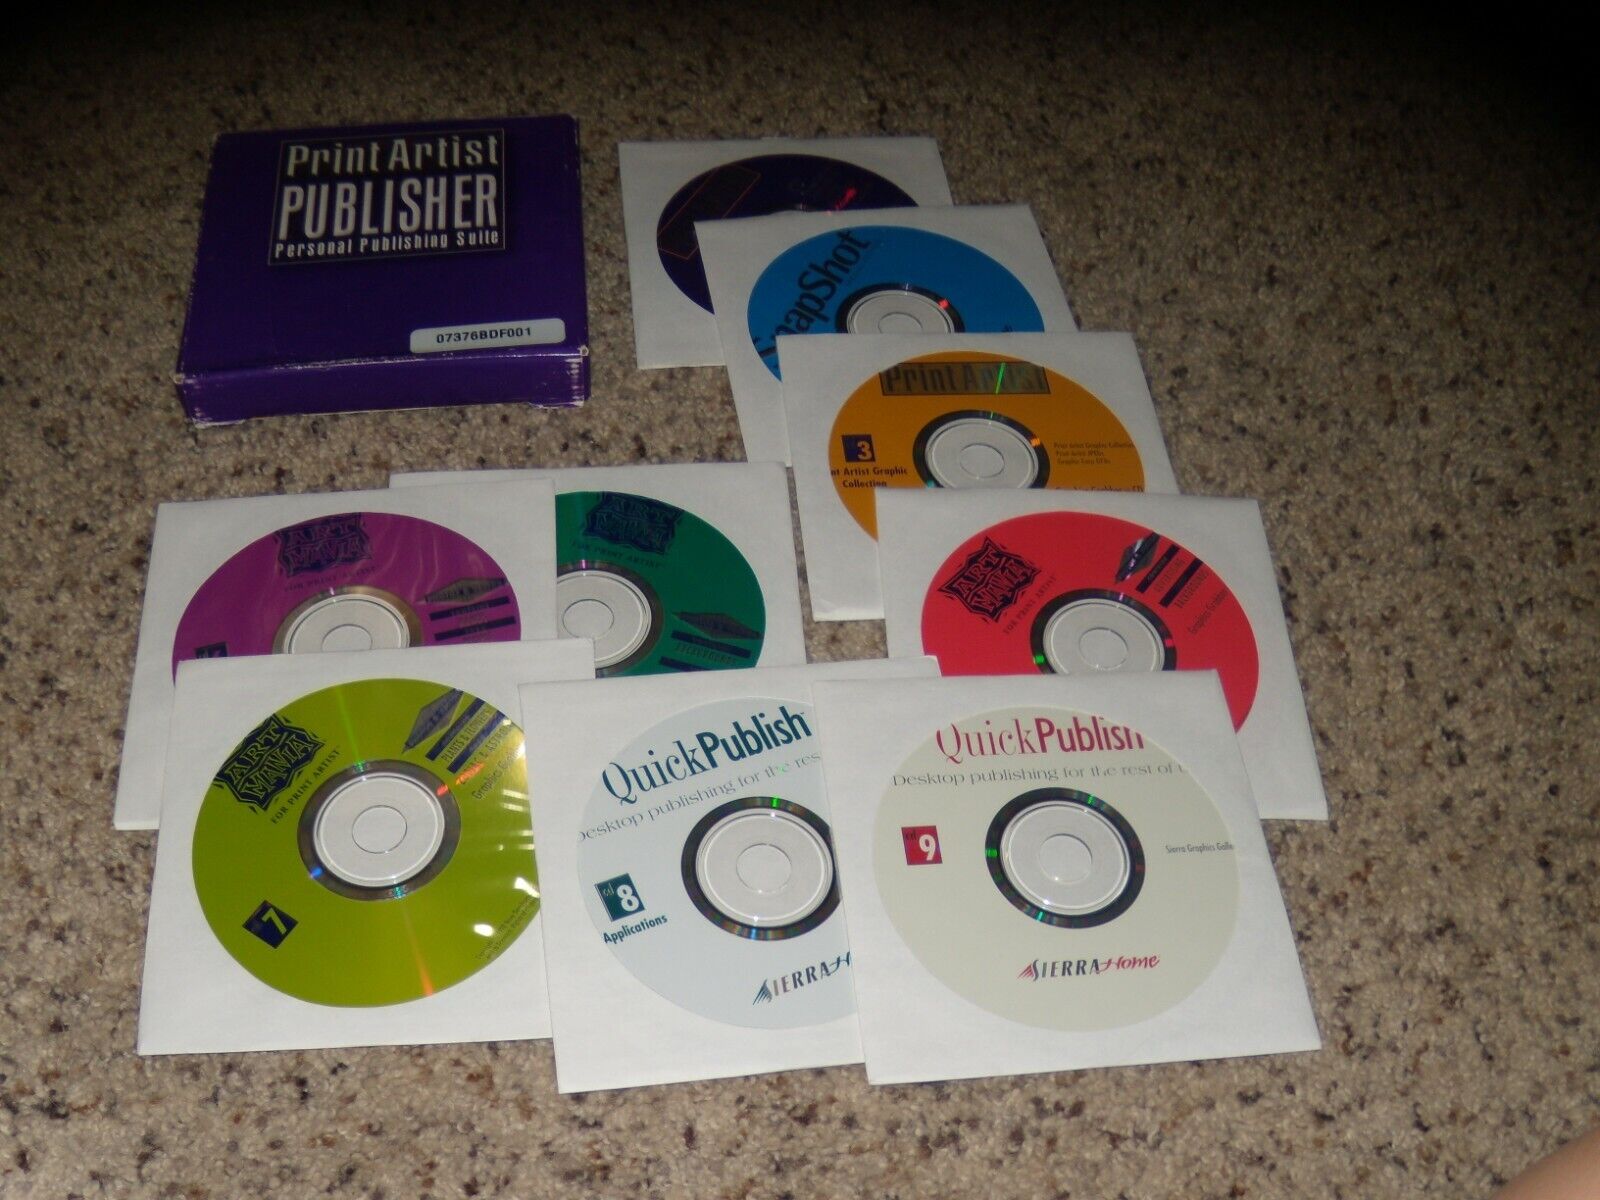 Print Artist Publisher PC Program with pictured disks